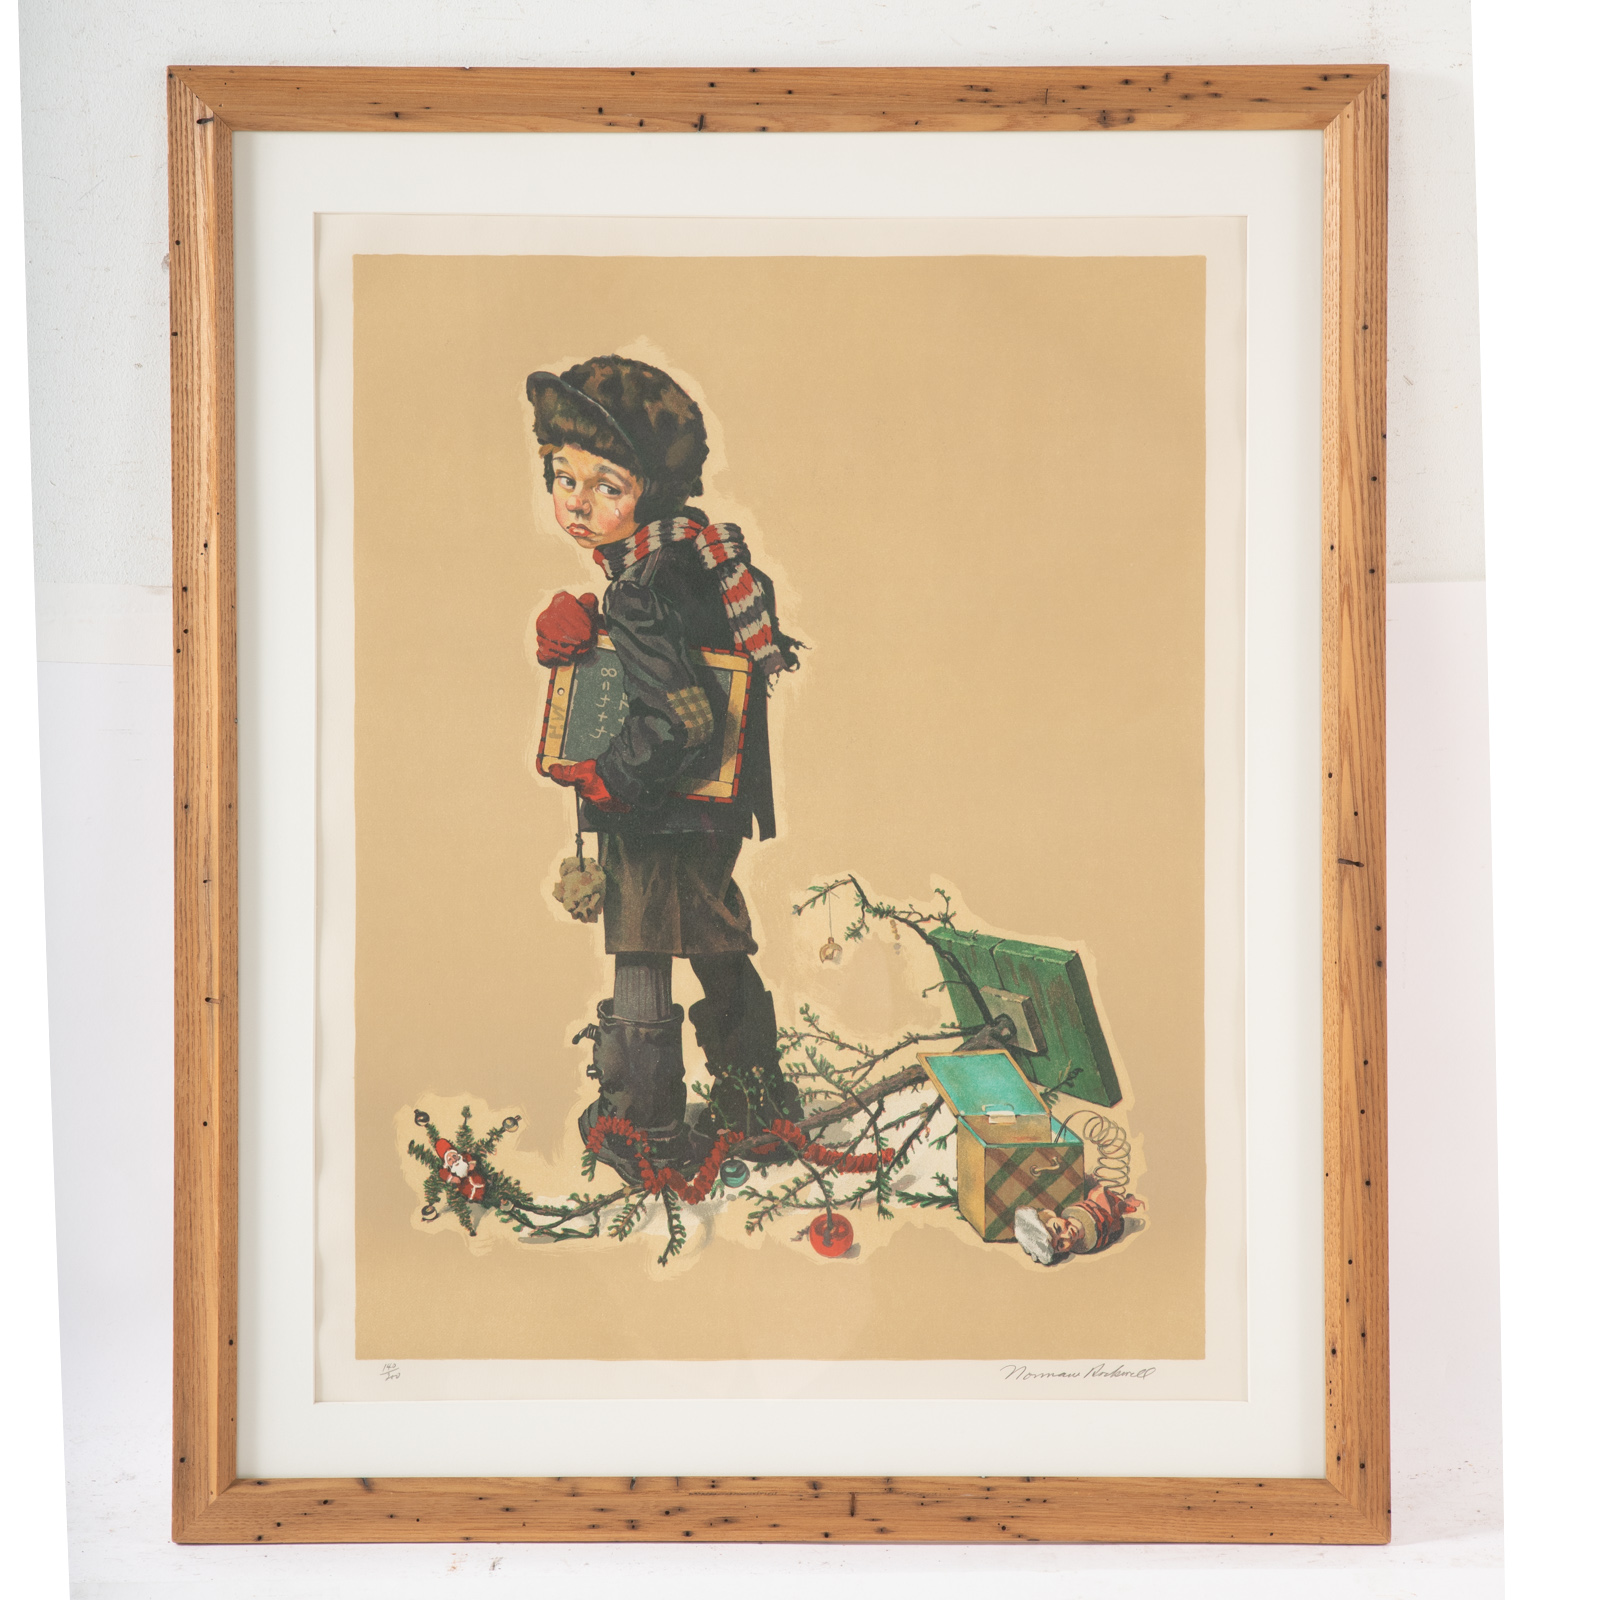 NORMAN ROCKWELL. AFTER CHRISTMAS,